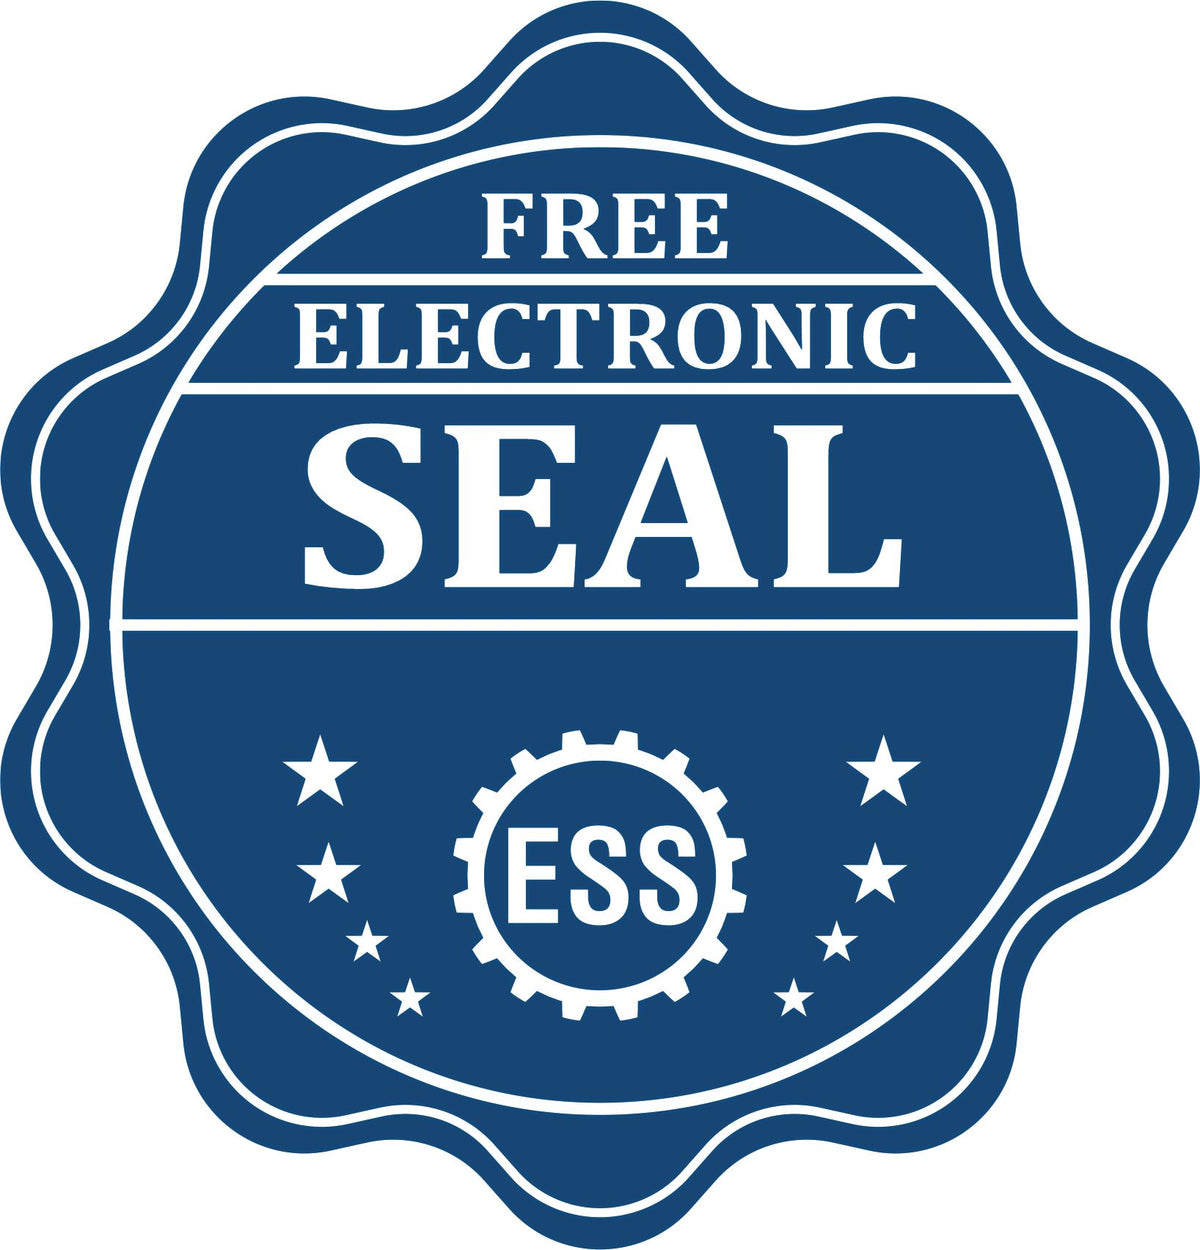 A badge showing a free electronic seal for the Hybrid Maryland Engineer Seal with stars and the ESS gear on the emblem.